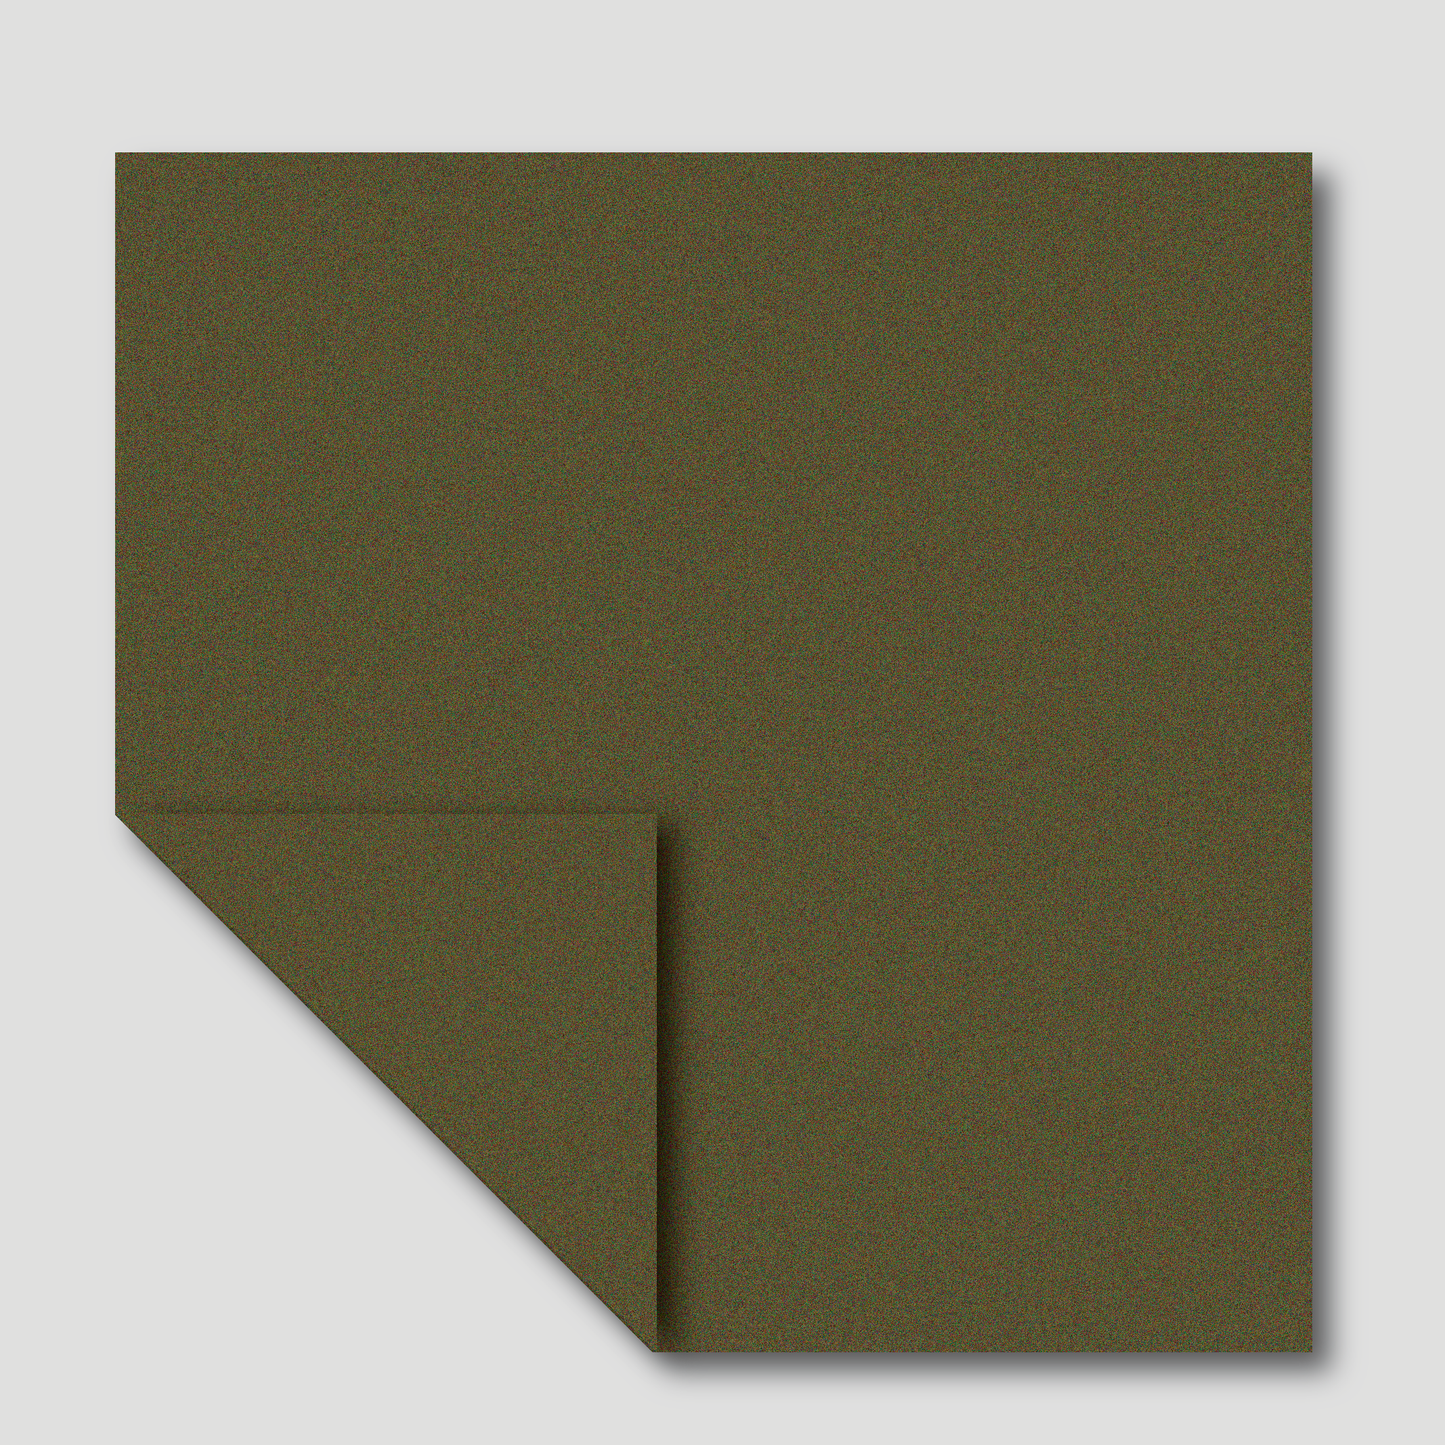 [Taro's Origami Studio] Biotope Jumbo 13.75 Inch / 35cm Single Color (Moss Green) 10 Sheets (All Same Color) Premium Japanese Paper for Advanced Folders (Made in Japan)